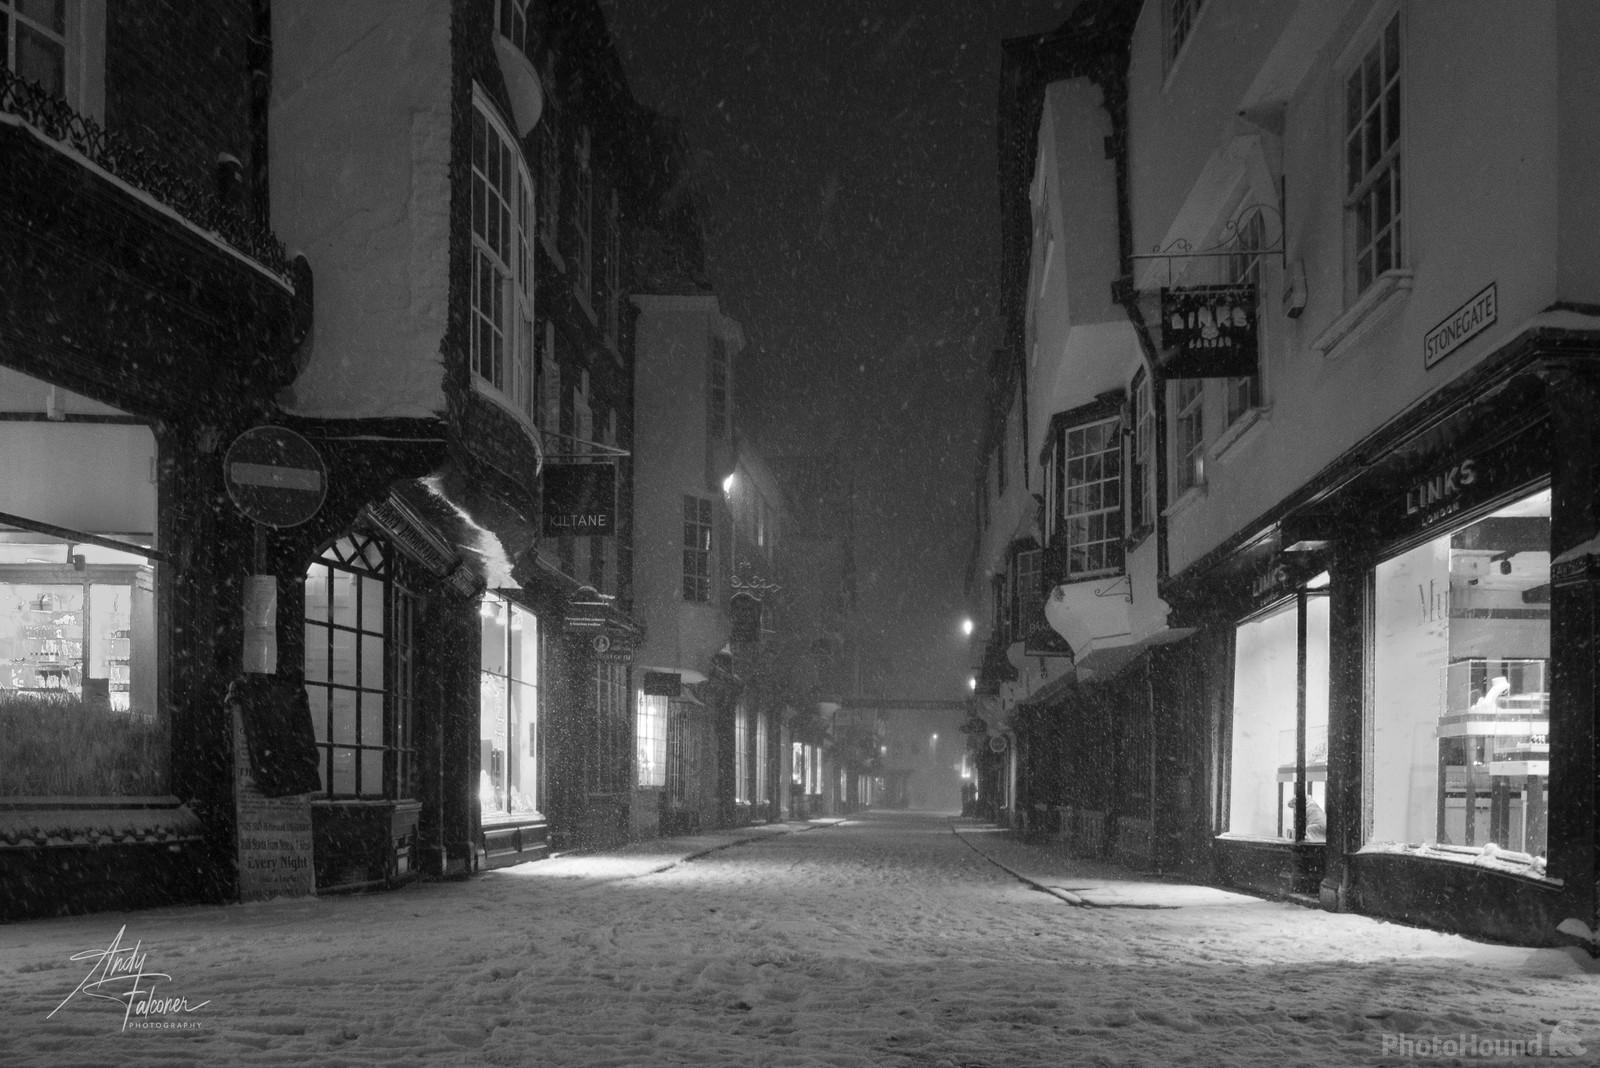 Image of Stonegate, York by Andy Falconer